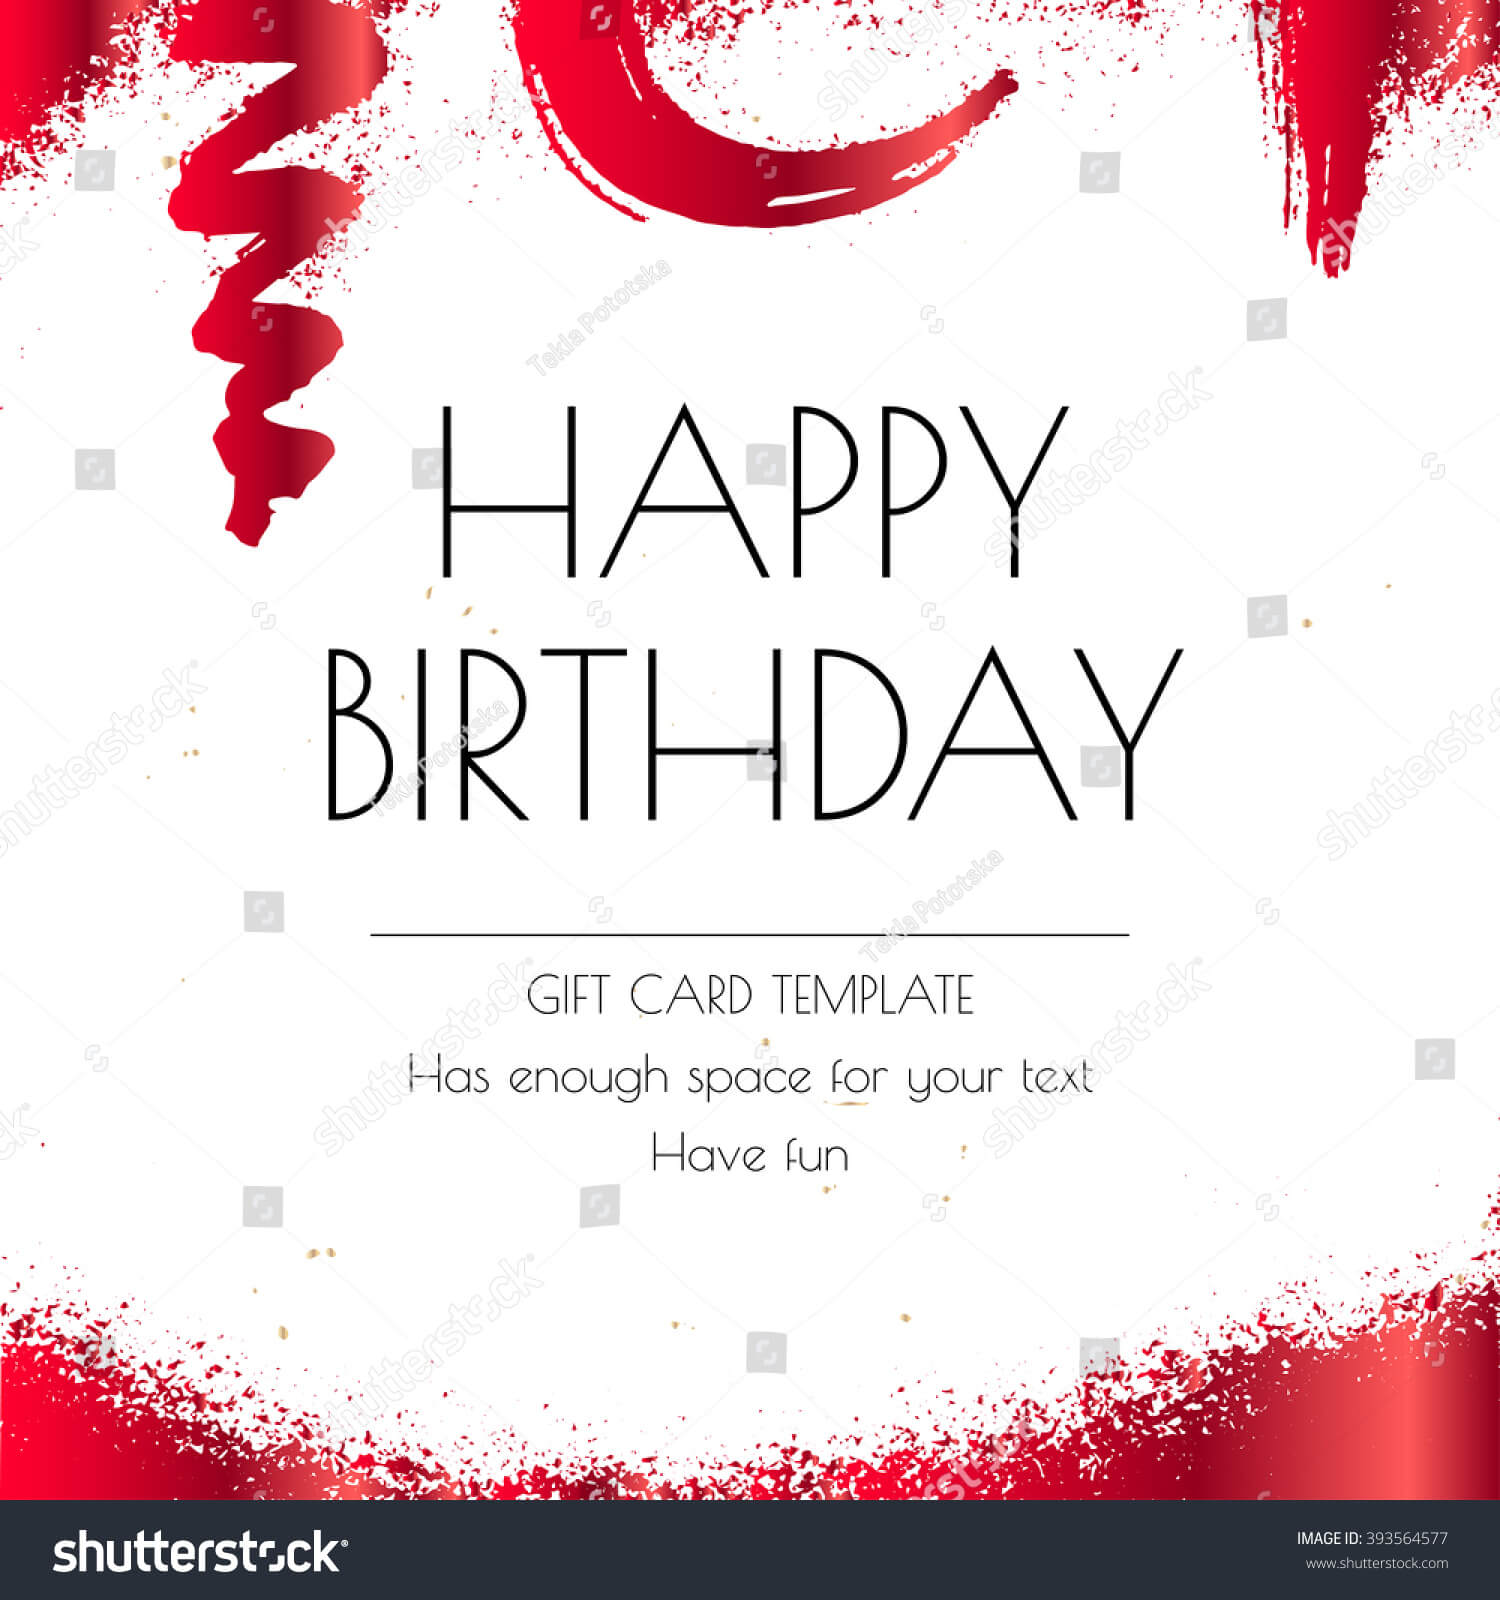 Thank You Card Indesign Template ] – Weekly Calendar Pertaining To Birthday Card Template Indesign